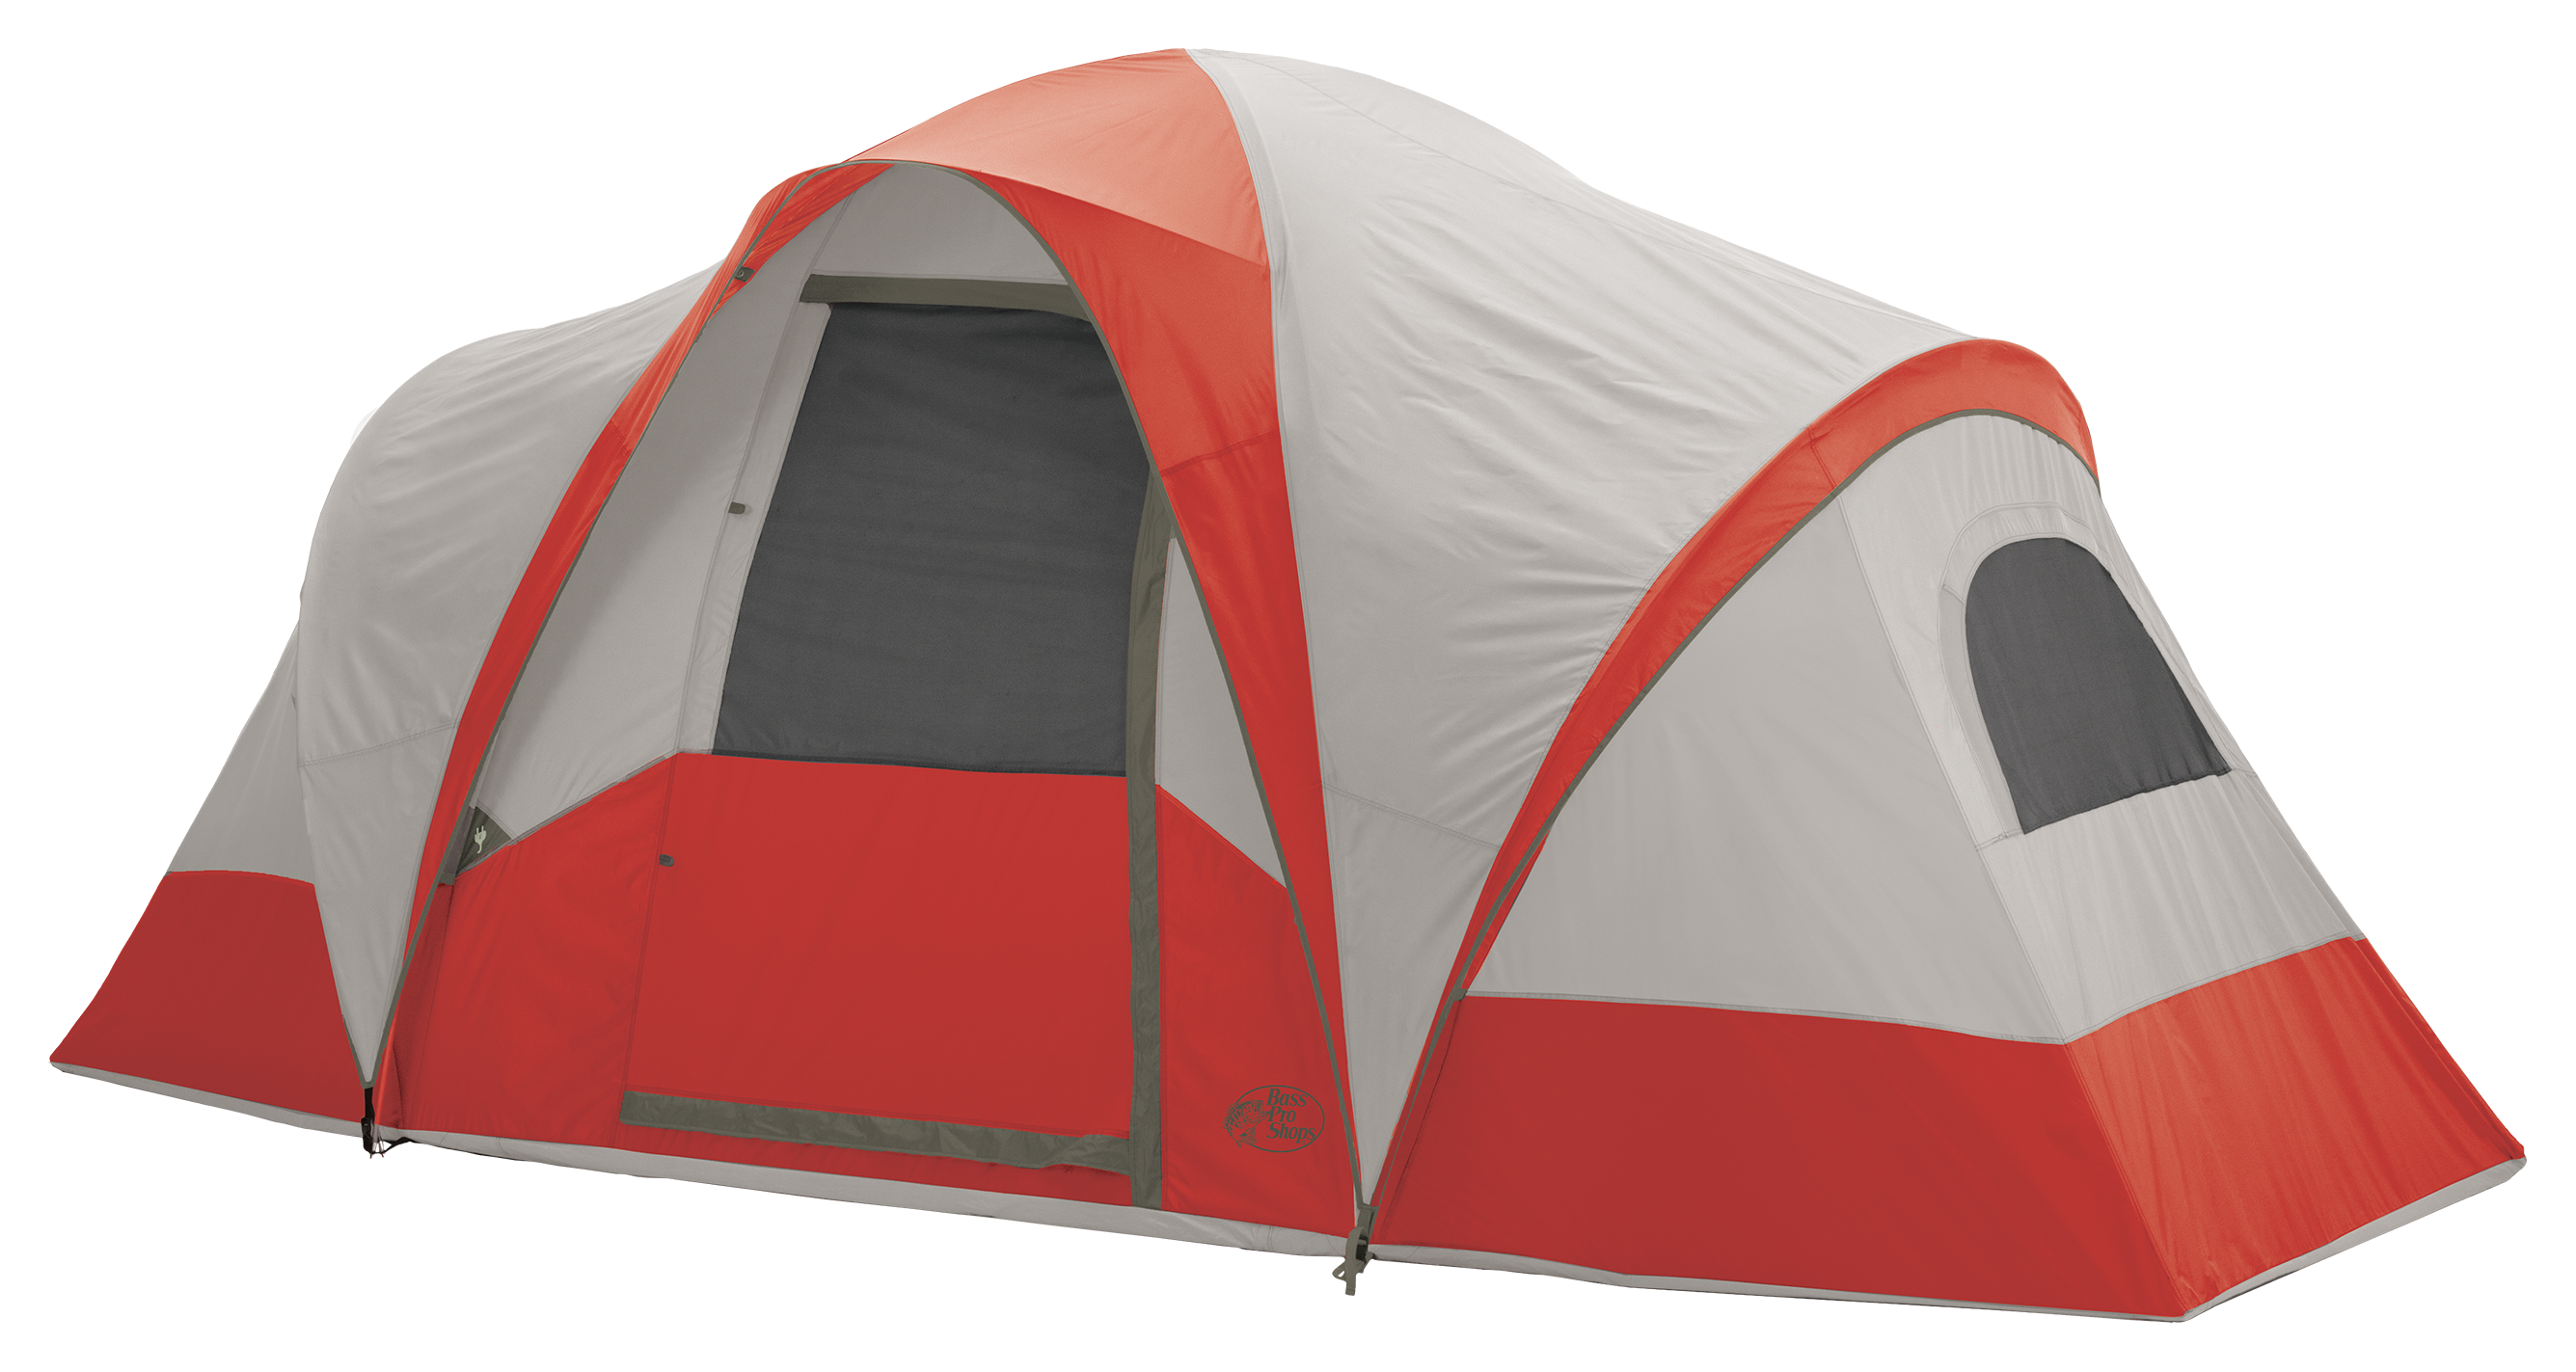 Bass Pro Shops 8-Person Modified Dome Tent